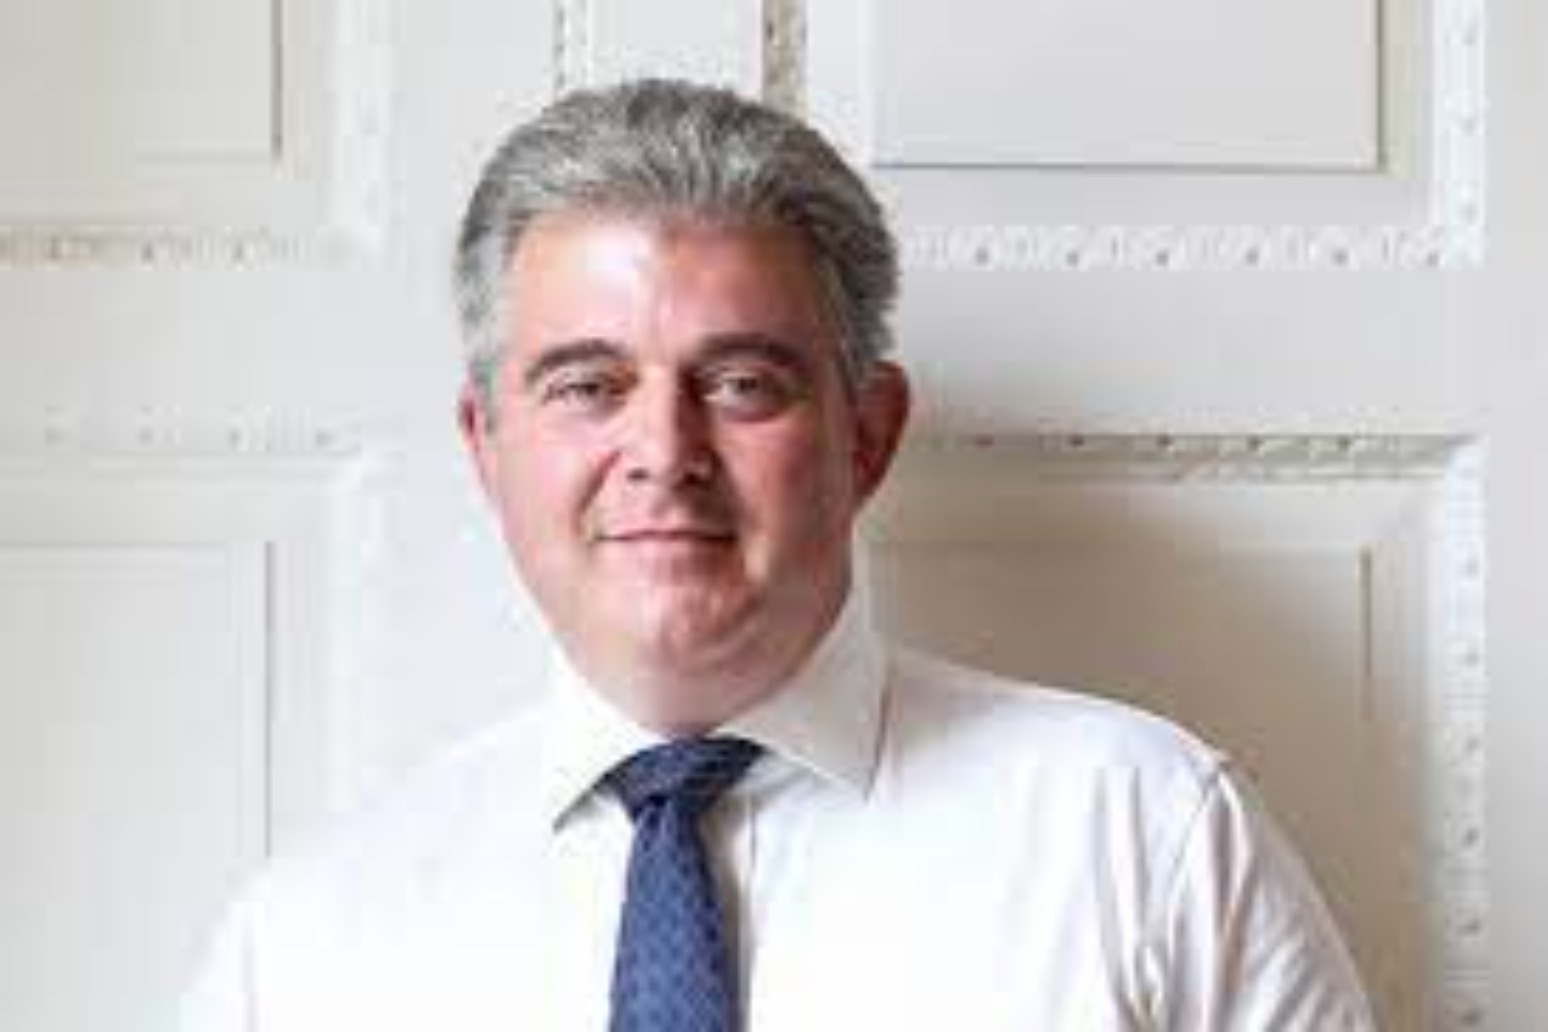 Brandon Lewis: UK showing ‘good faith’ by not triggering Article 16. 